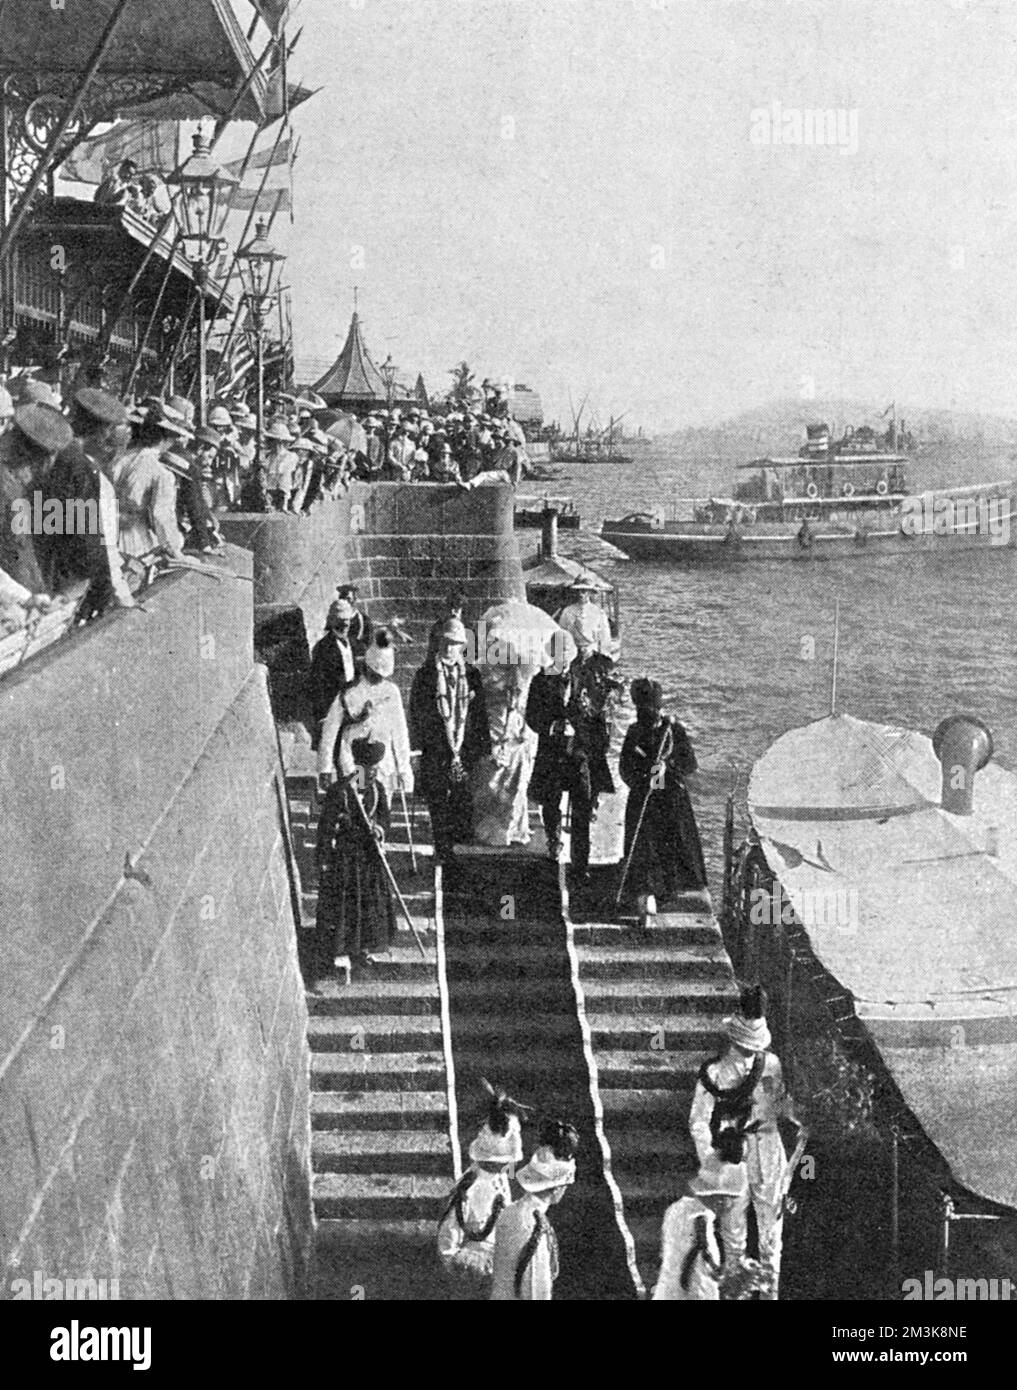 Lord Curzon described India as 'the dream of my childhood, the fulfilled ambition of my manhood.' Here he is shown leaving from Bombay on 18th November 1905.     Date: 4th November 1911 Stock Photo